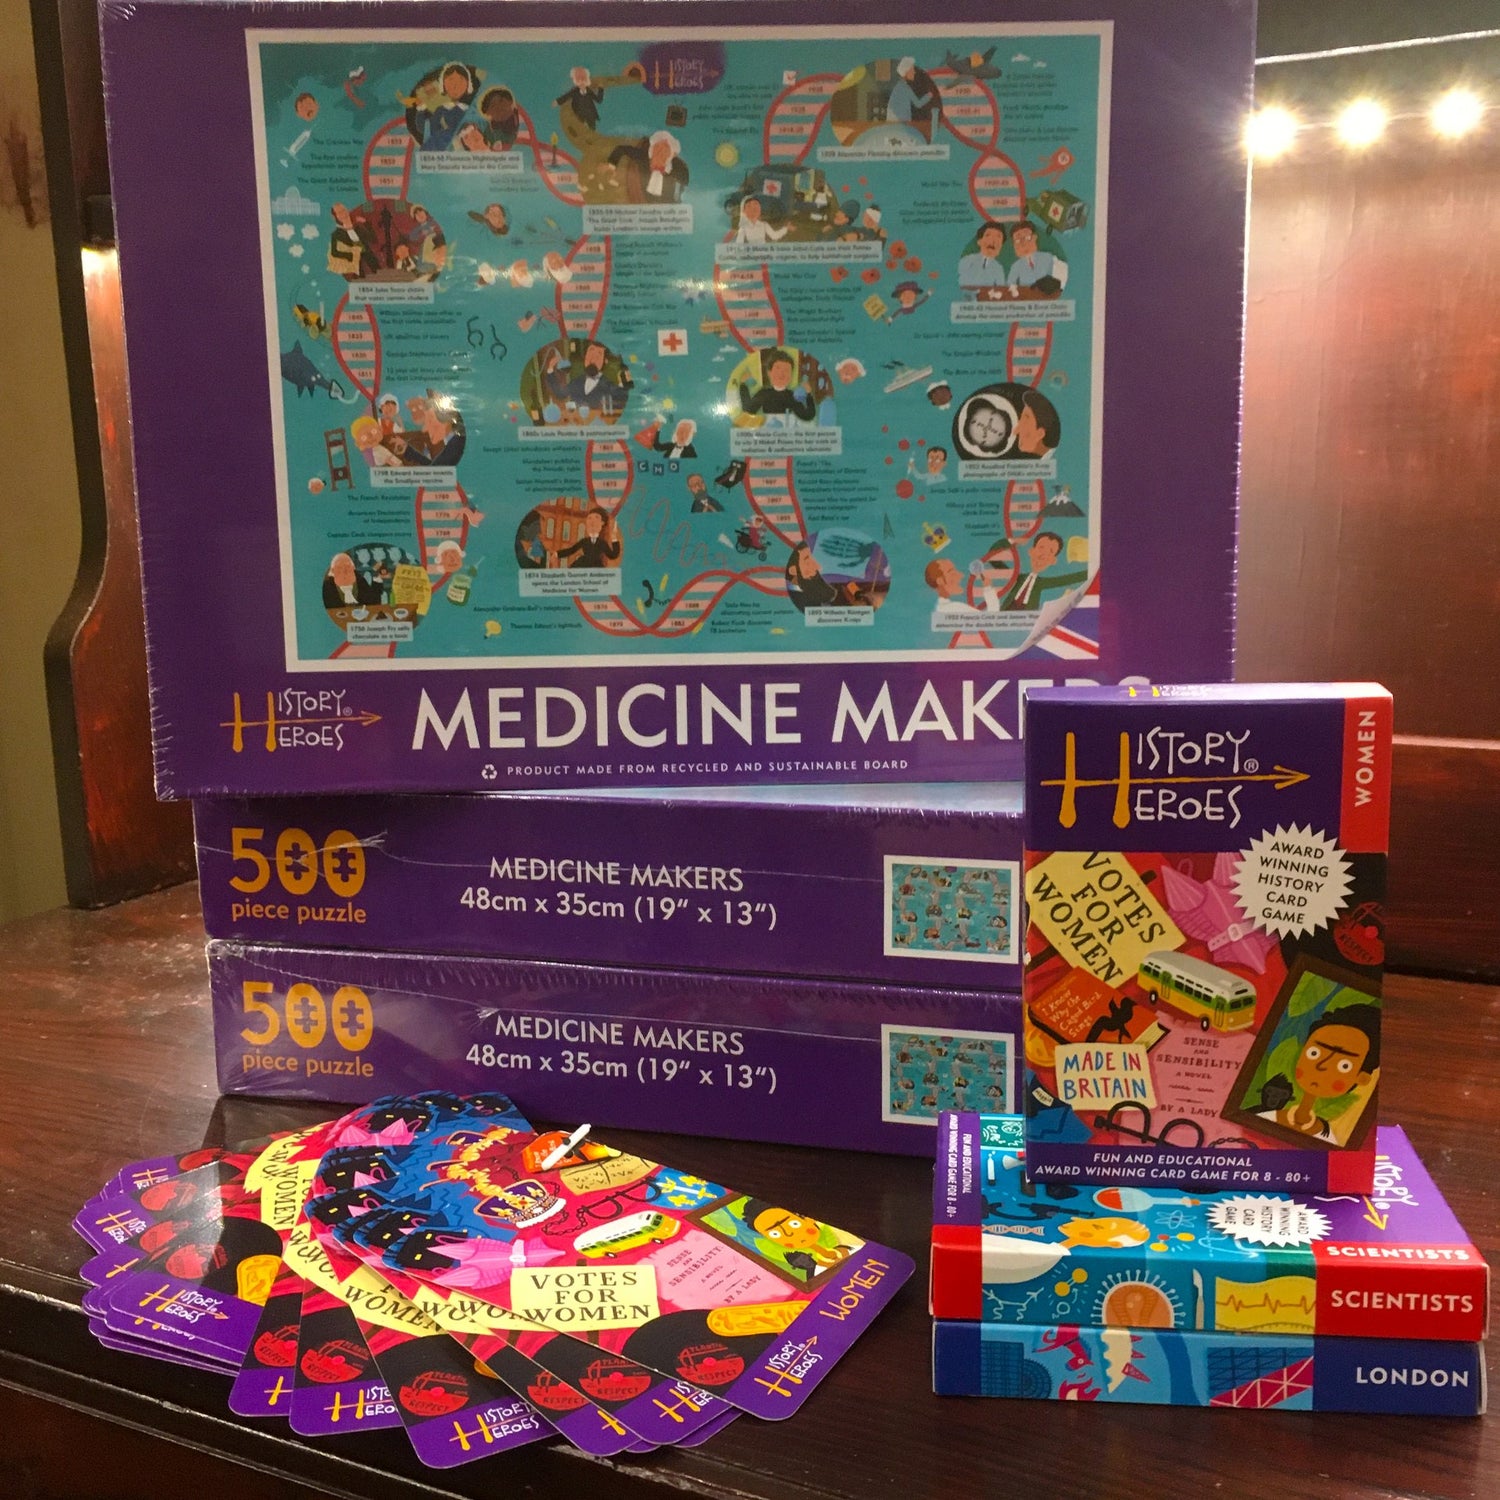 Three Medicine Makers jigsaw boxes; boxes of Women, Scientists and London History Heroes; and some of the History Heroes Women cards spread out on the table